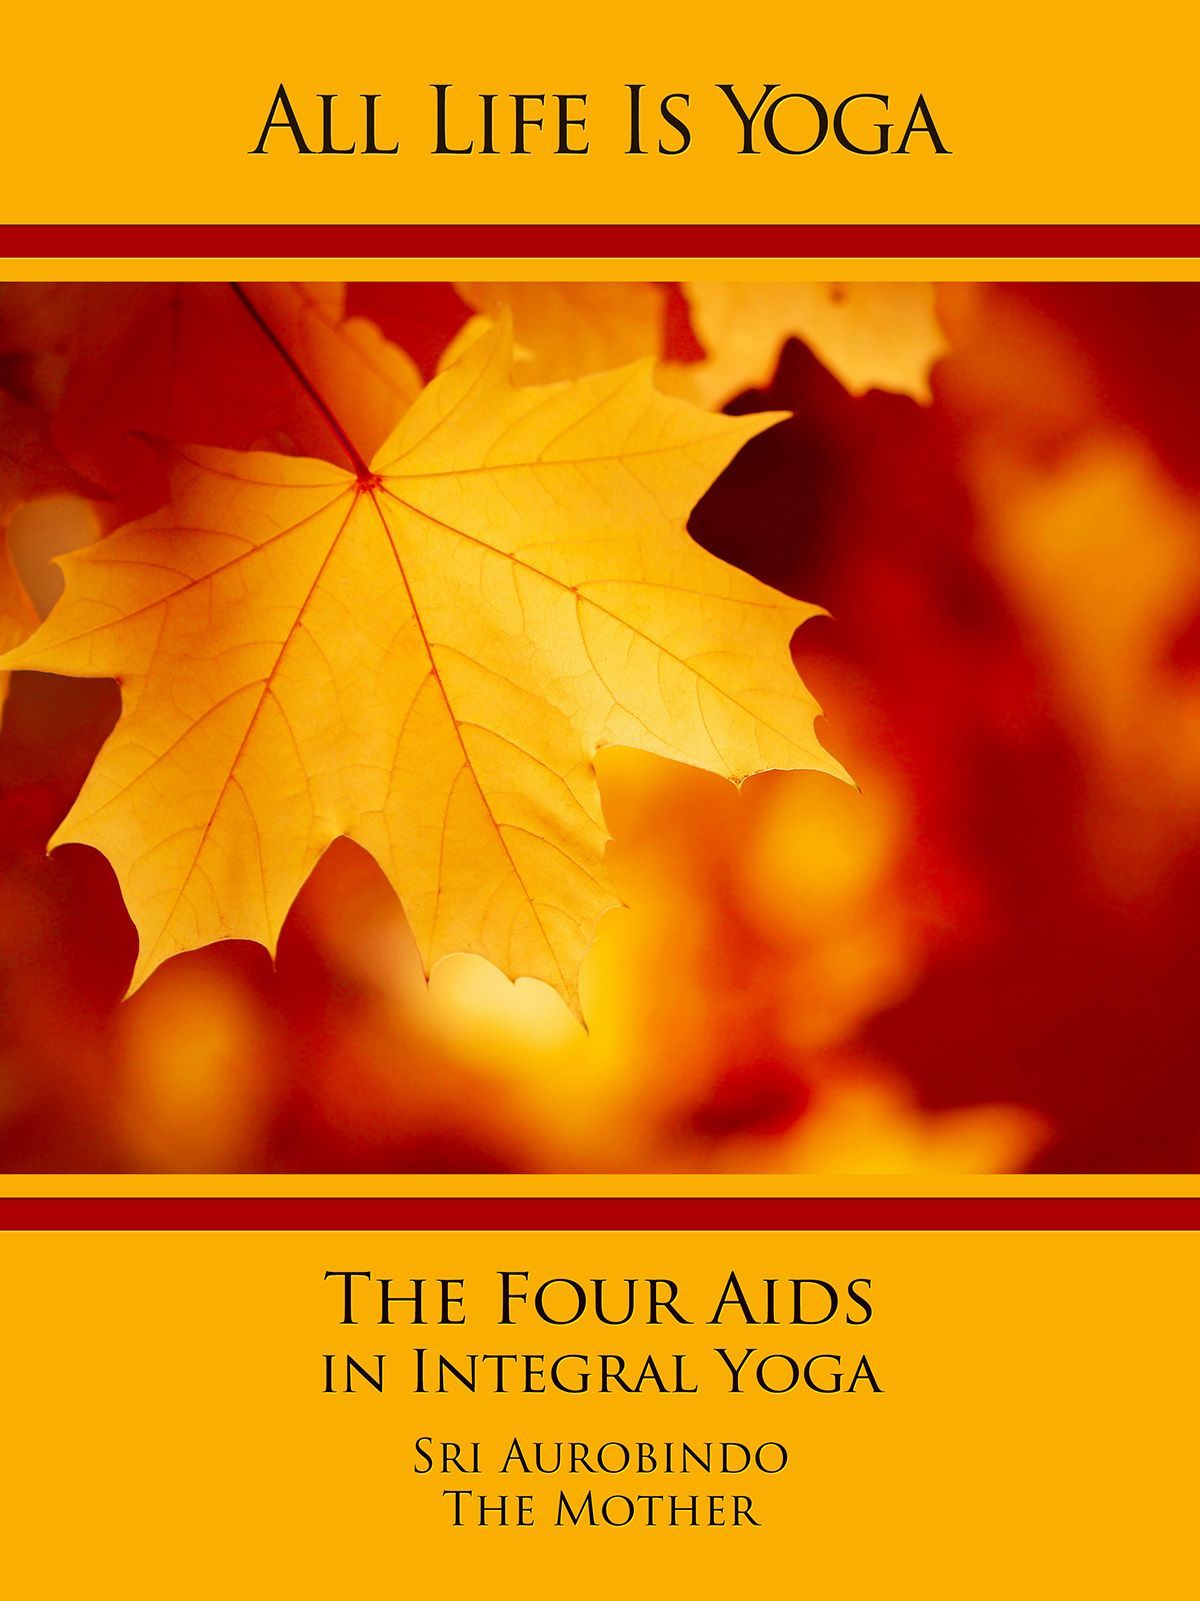 The Four Aids in Integral Yoga